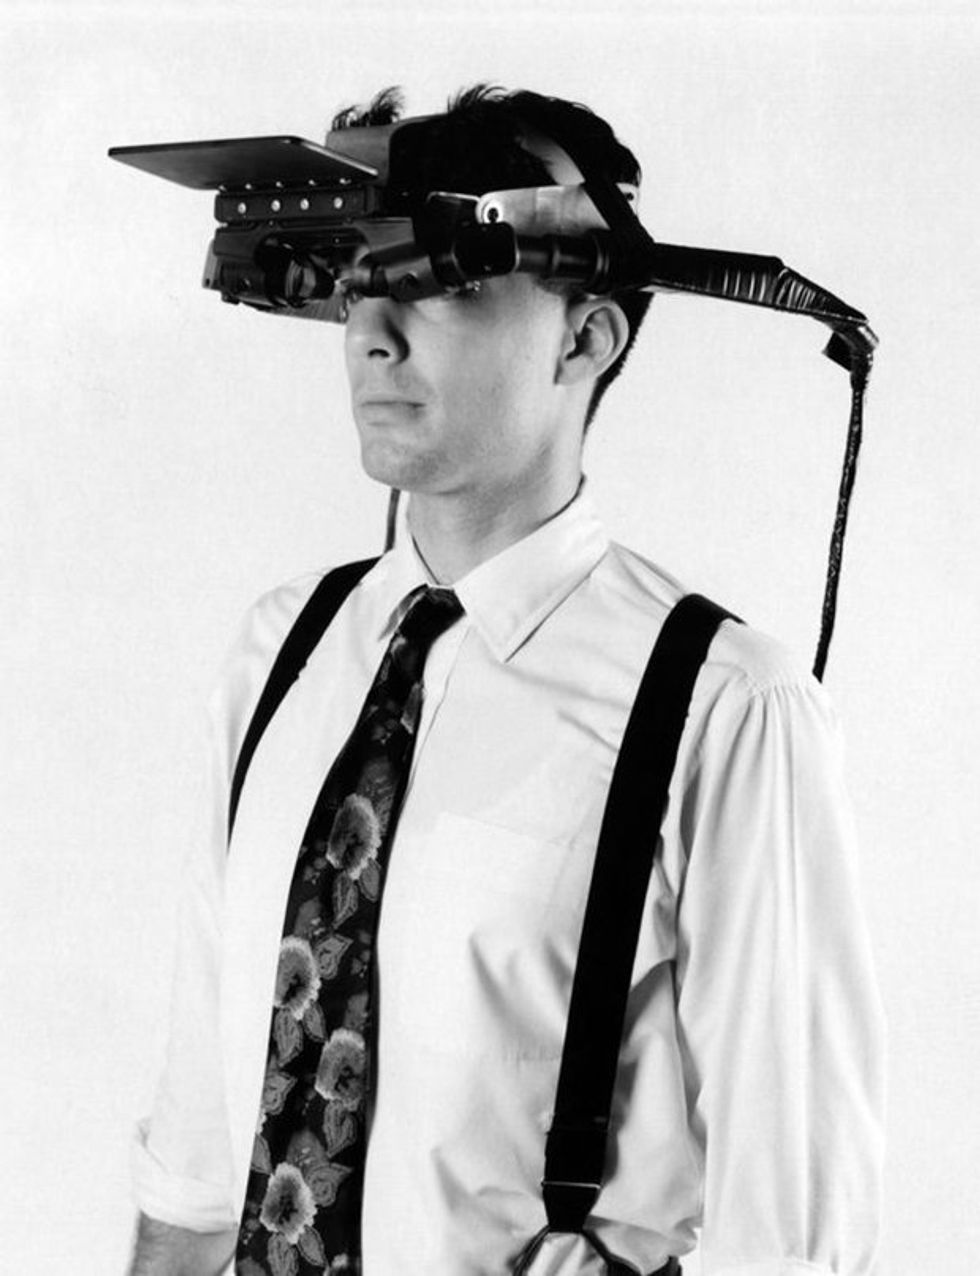 A black and white photo of a man wearing a large head-mounted display